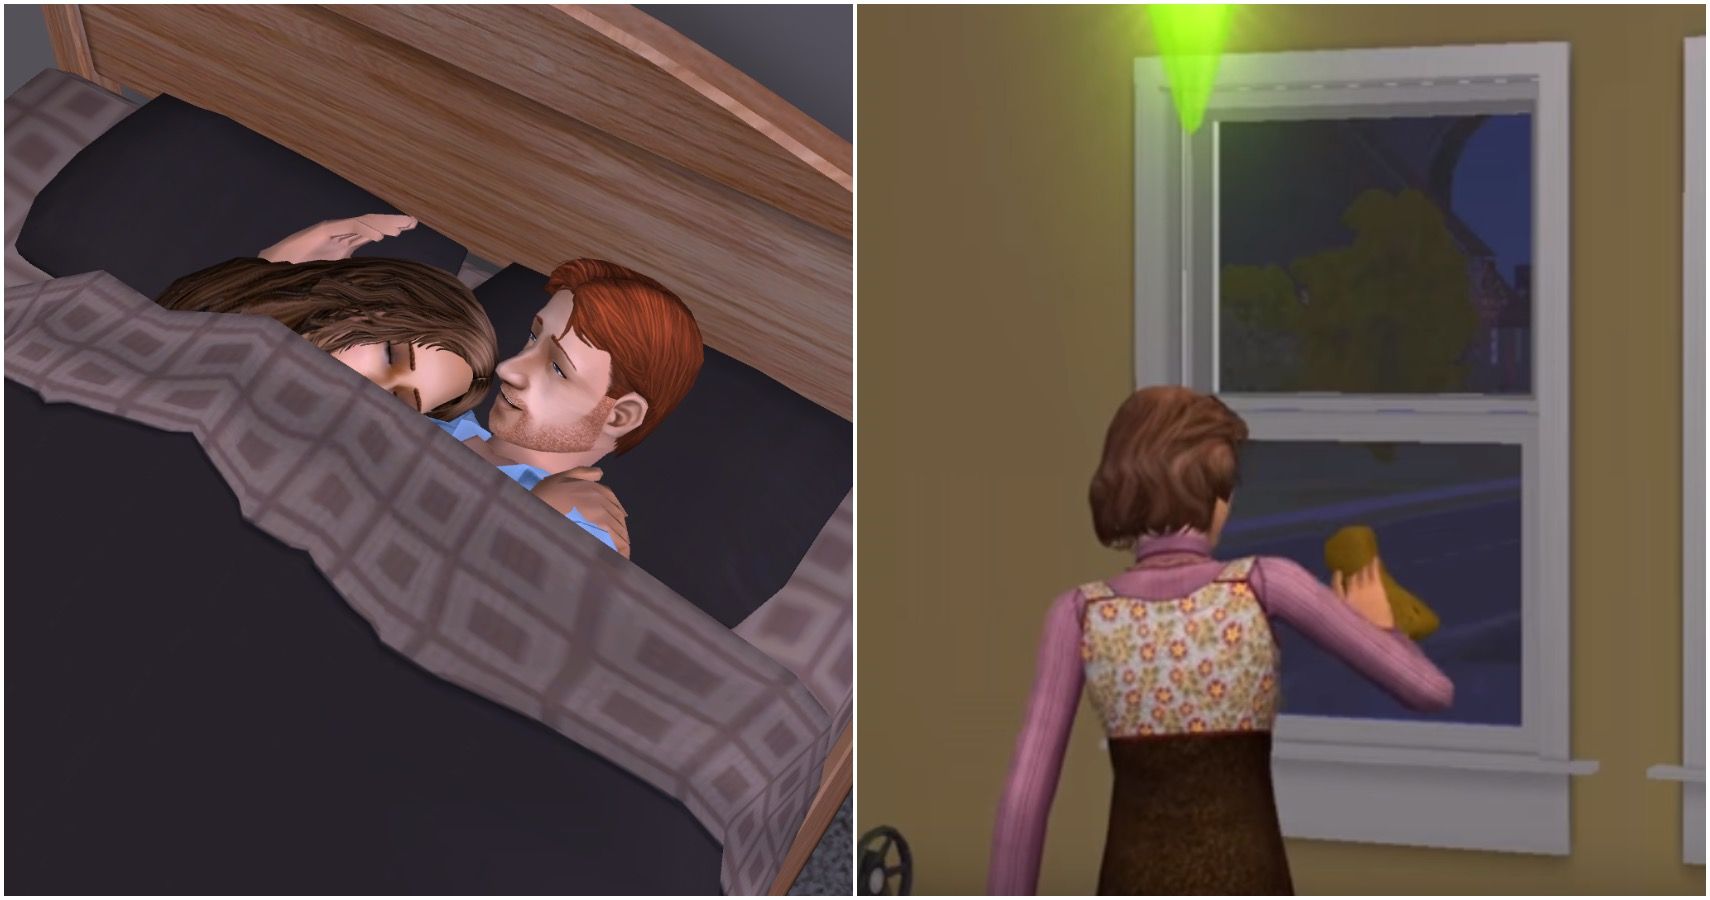 Two sims cuddled in bed and a sim cleaning a window